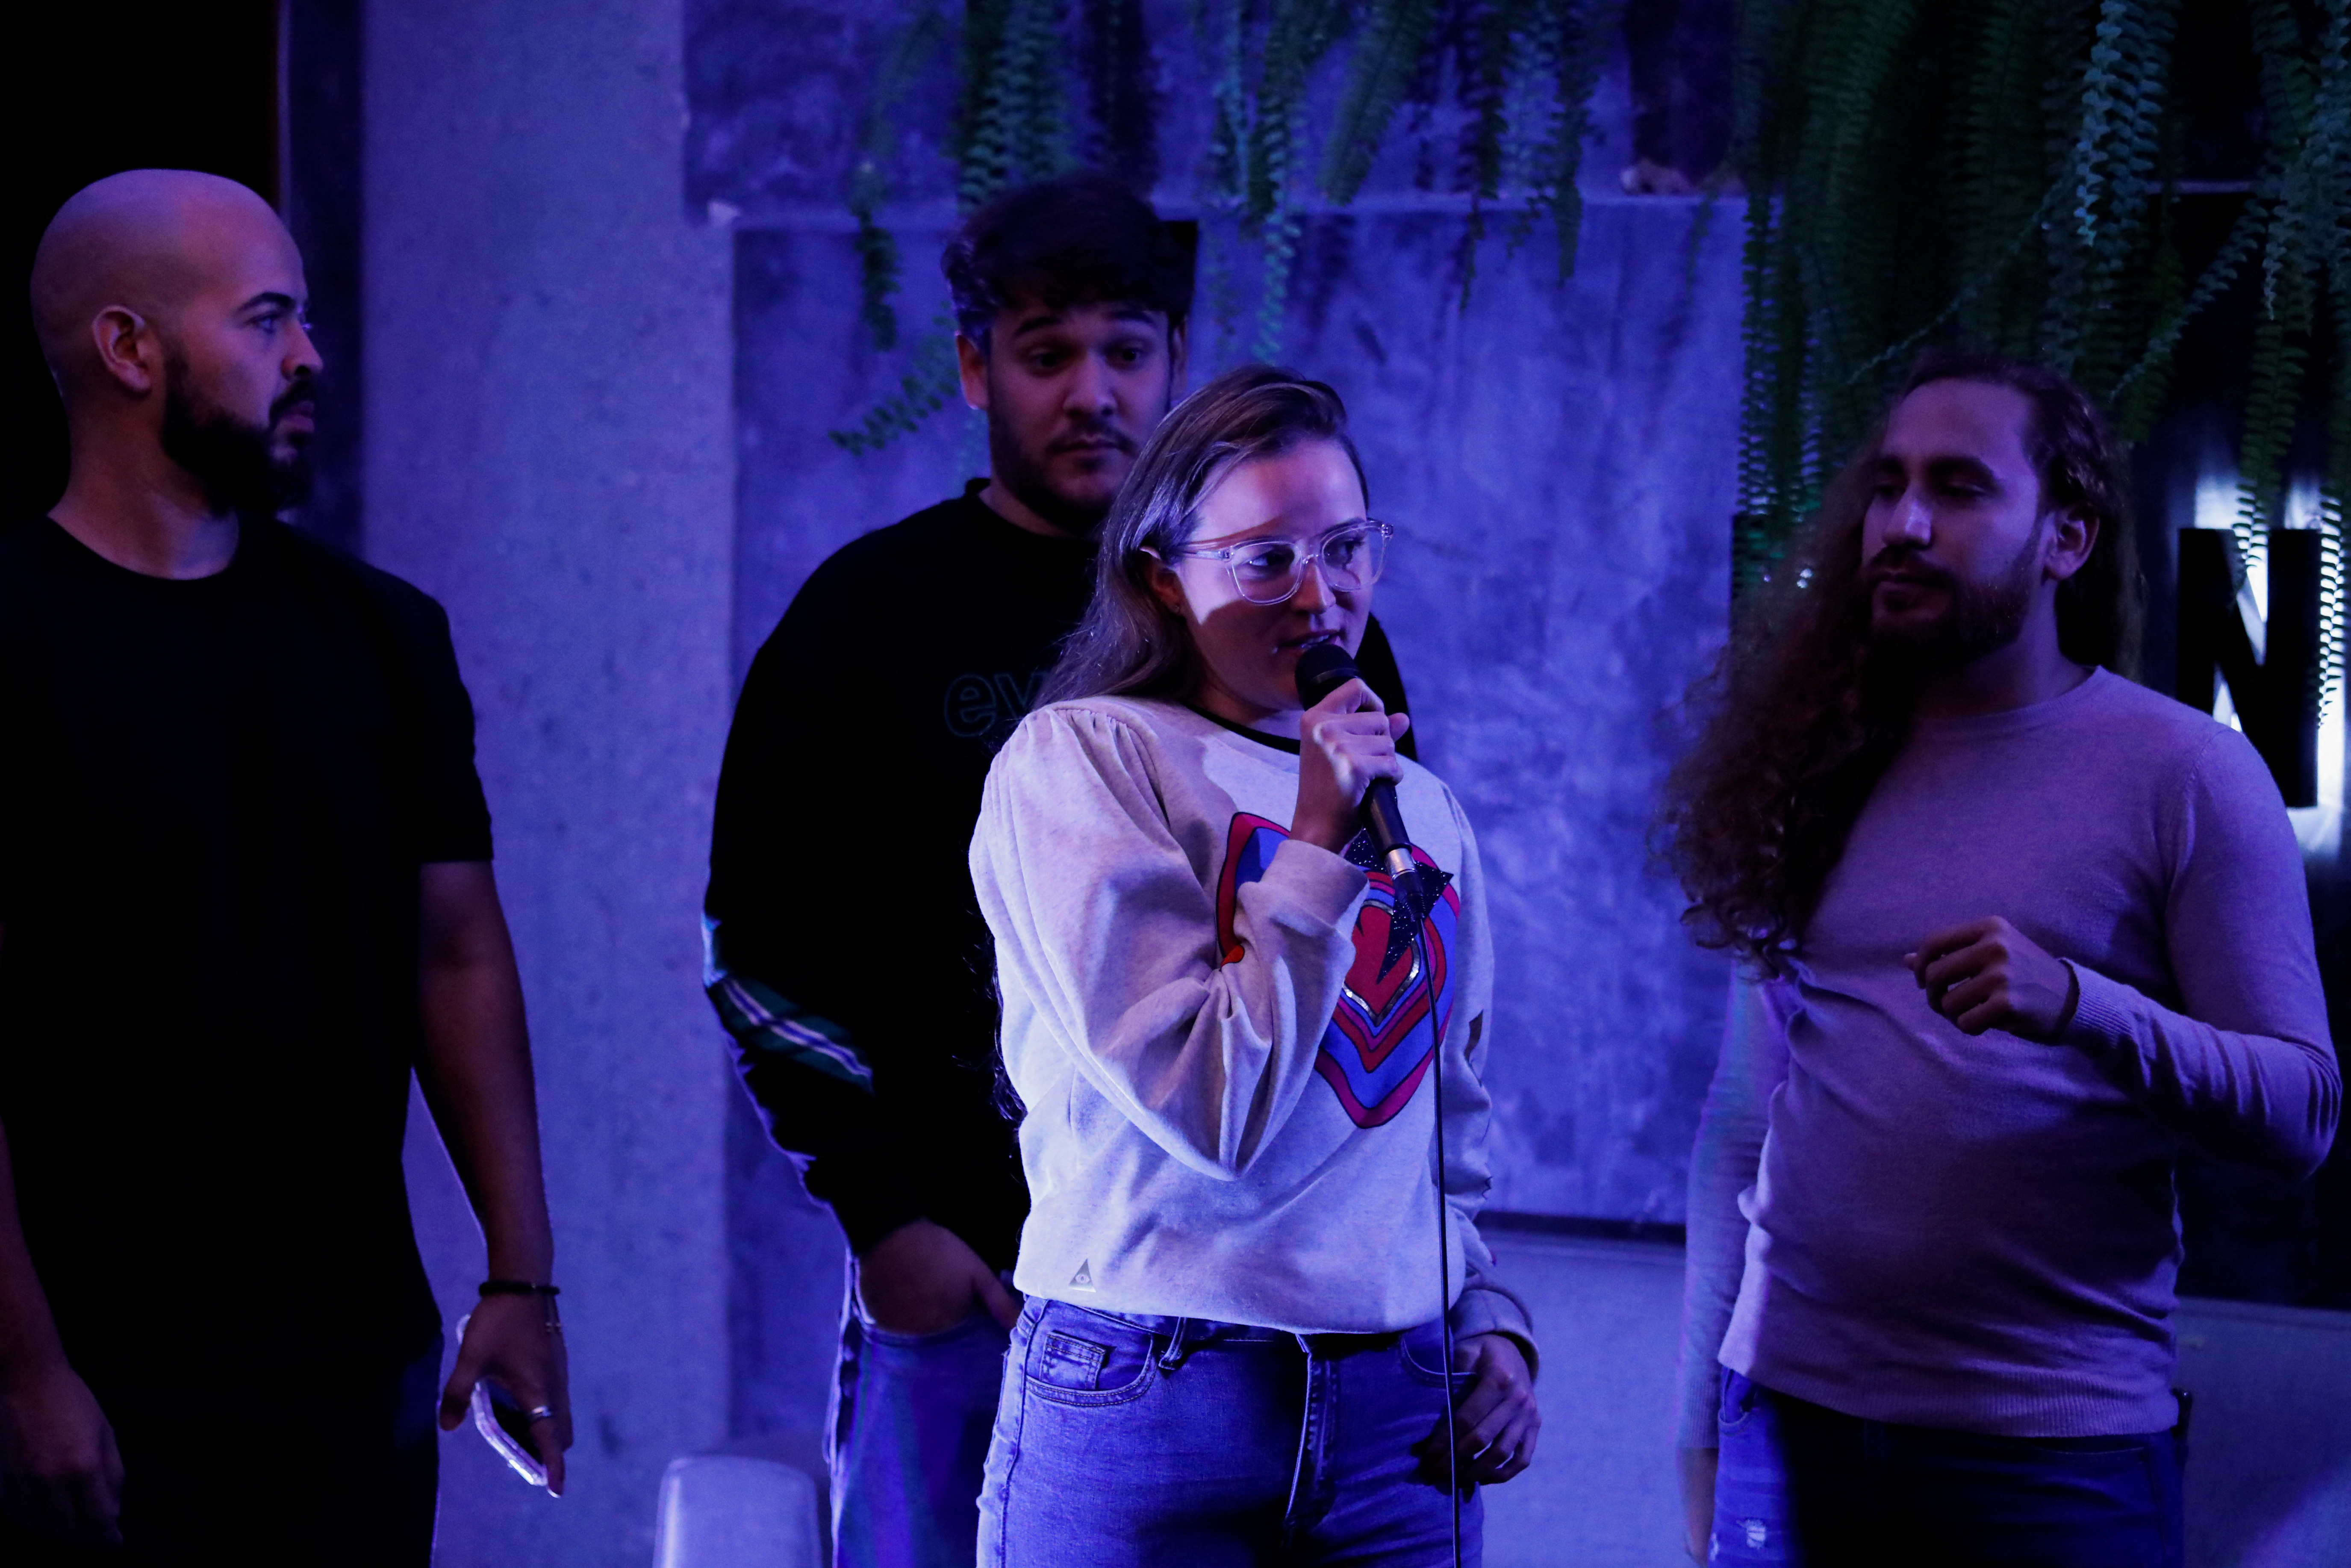 Apolitical stand-up comedy gains steam in the Venezuelan capital